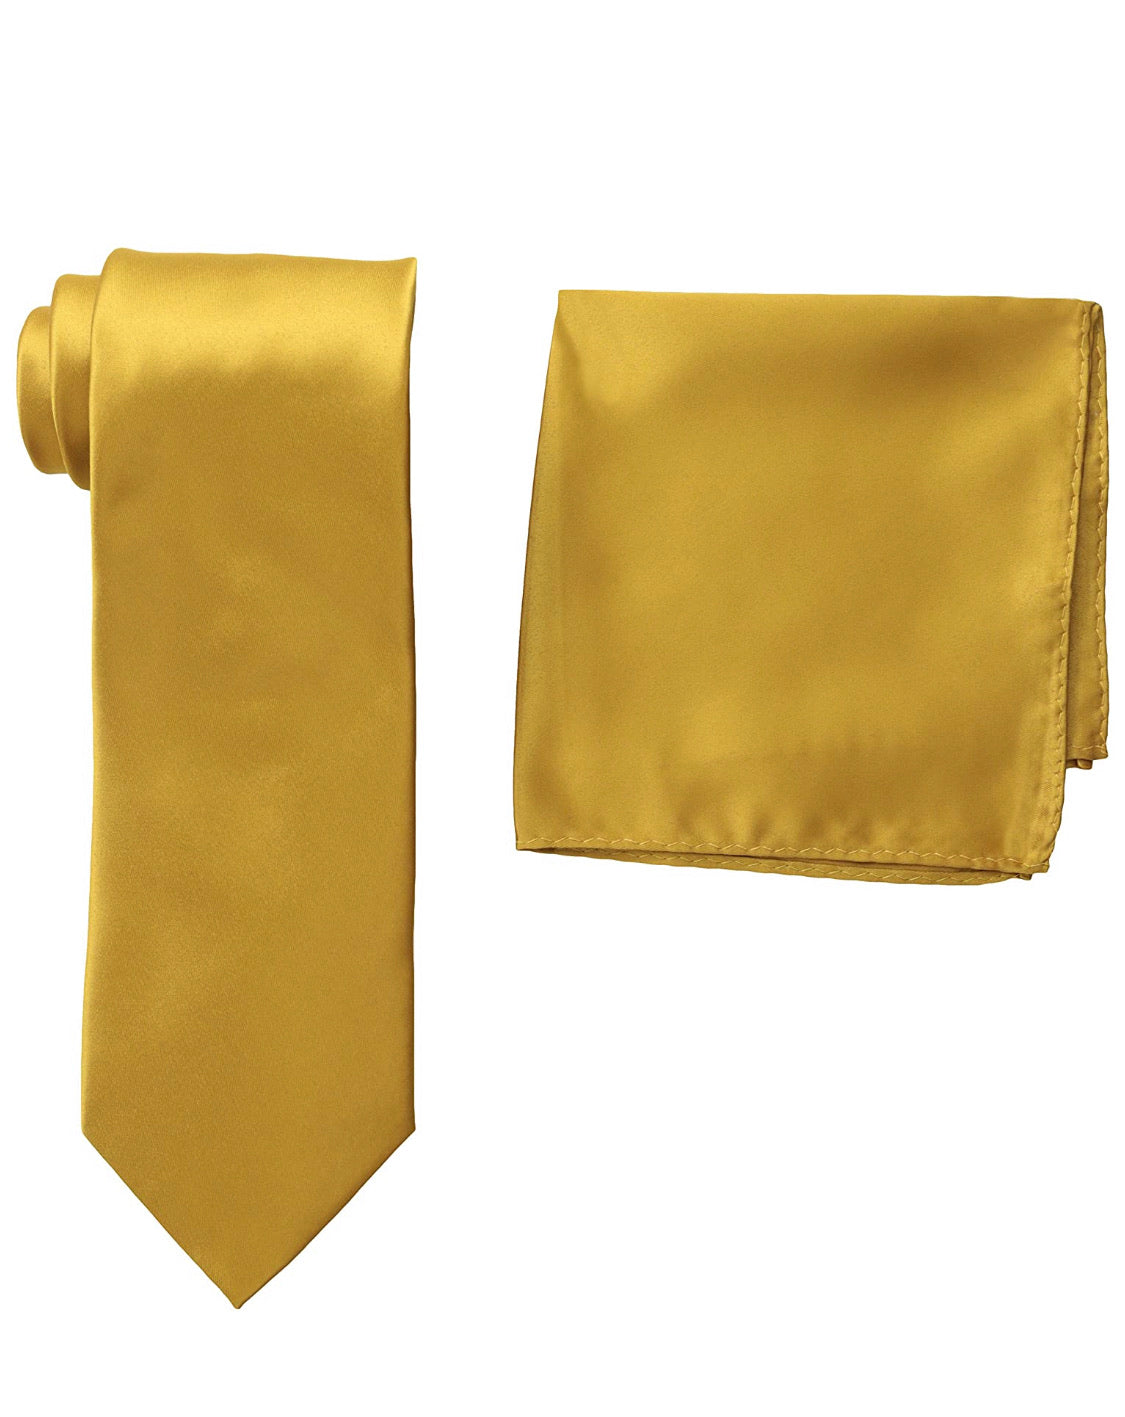 Stacy Adams Solid Gold Tie and Hanky - On Time Fashions Tuscaloosa